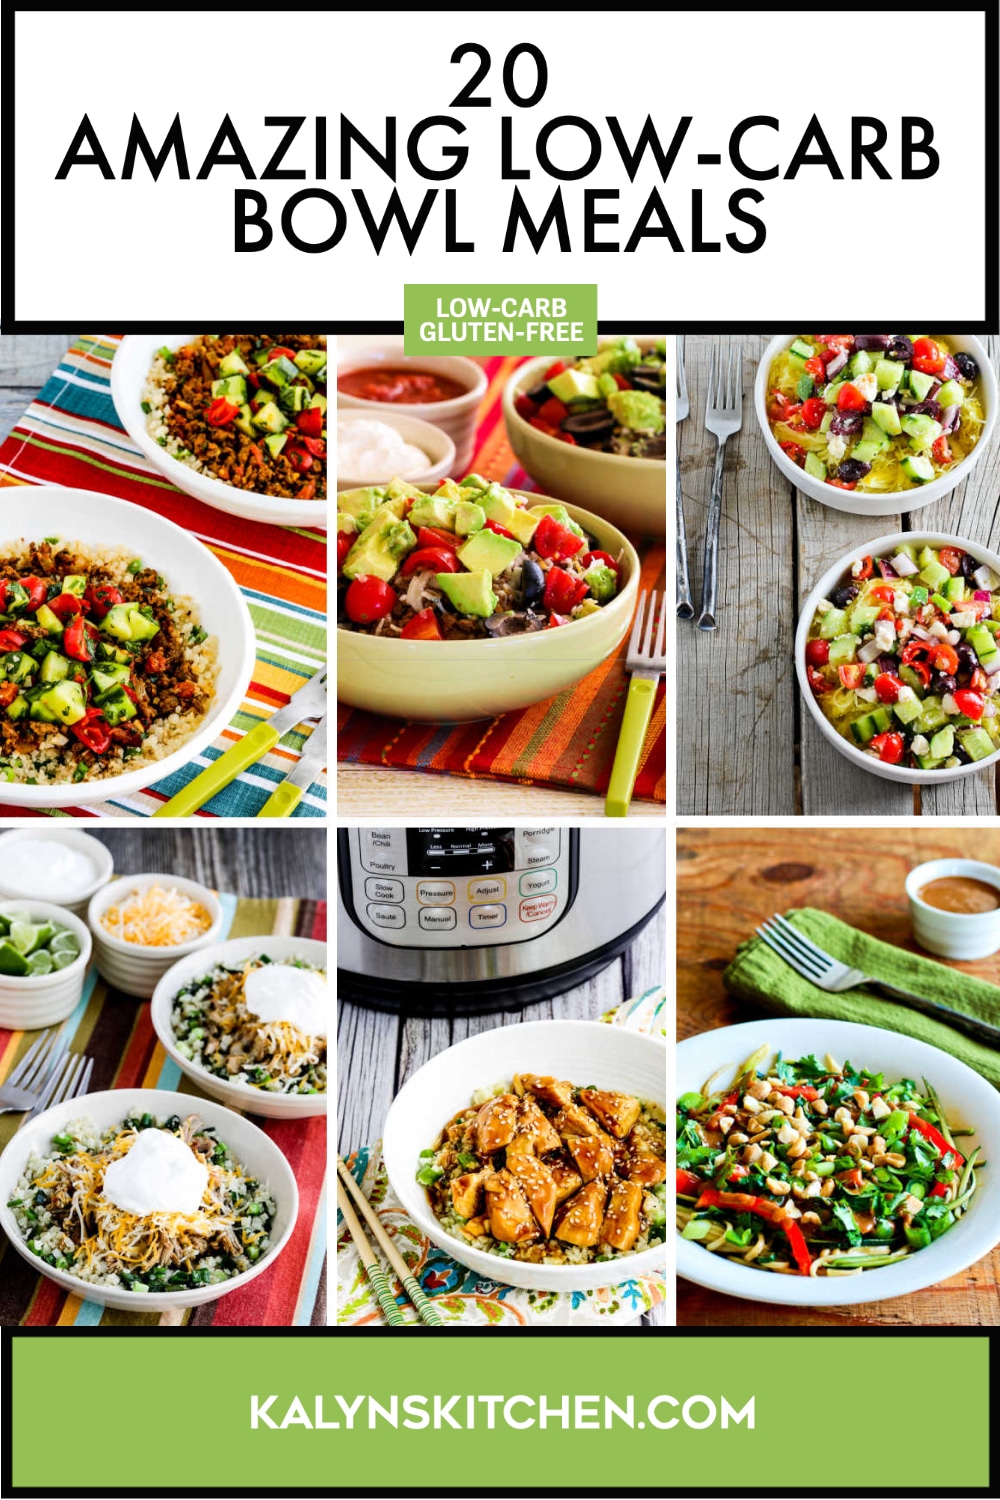 Pinterest image of 20 Amazing Low-Carb Bowl Meals